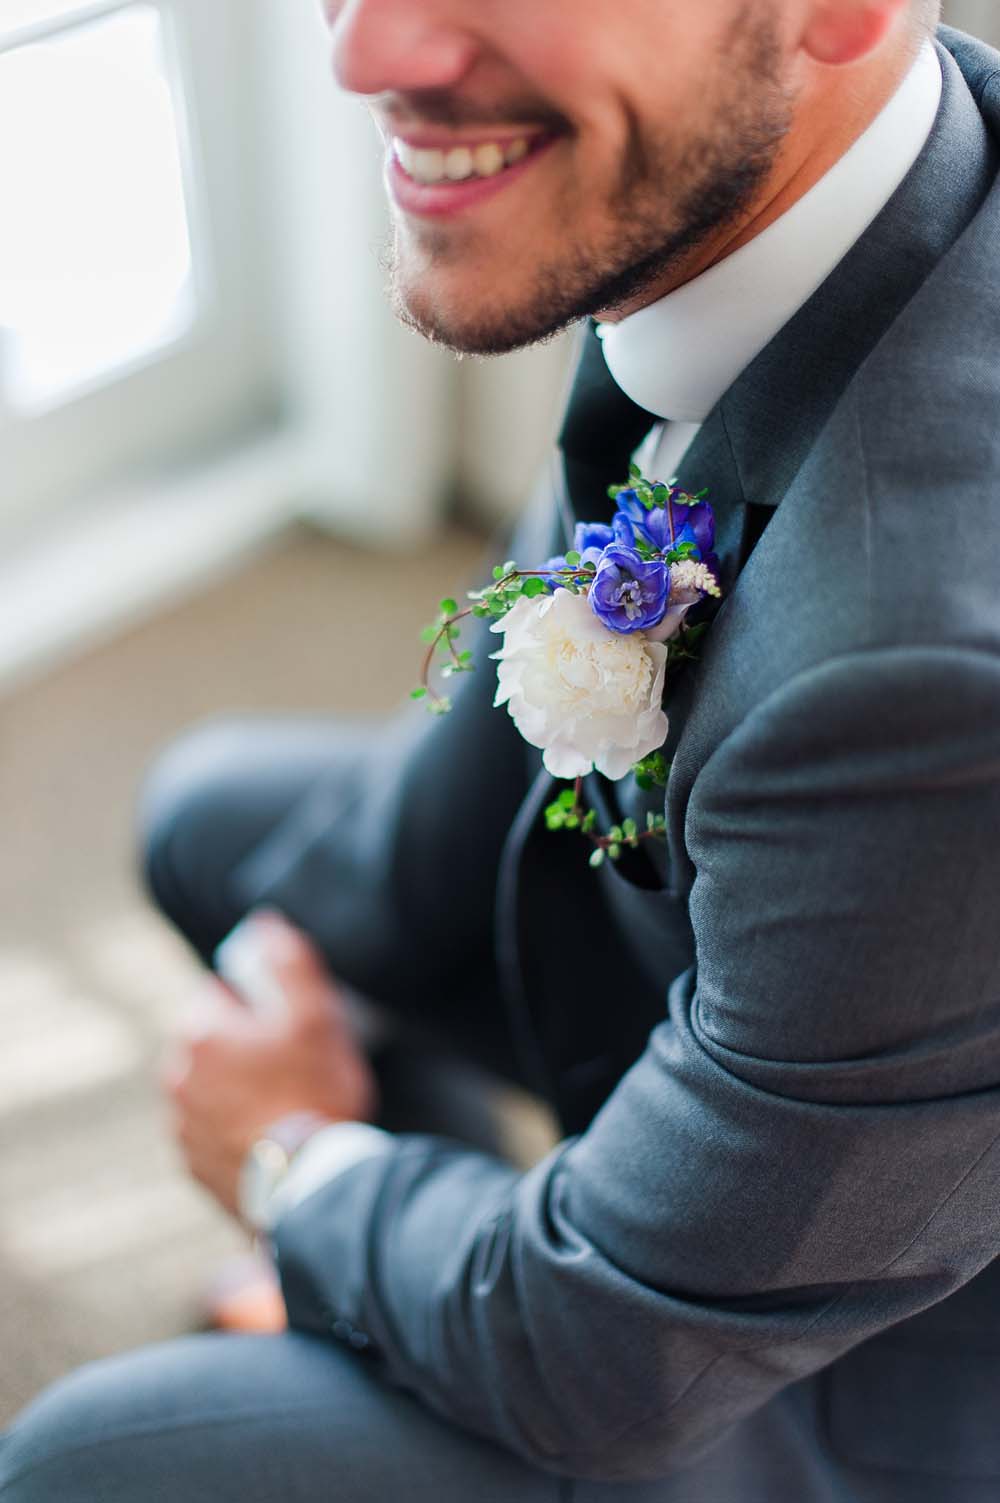 An Ultra Violet-Inspired Styled Shoot In Quebec - Groom